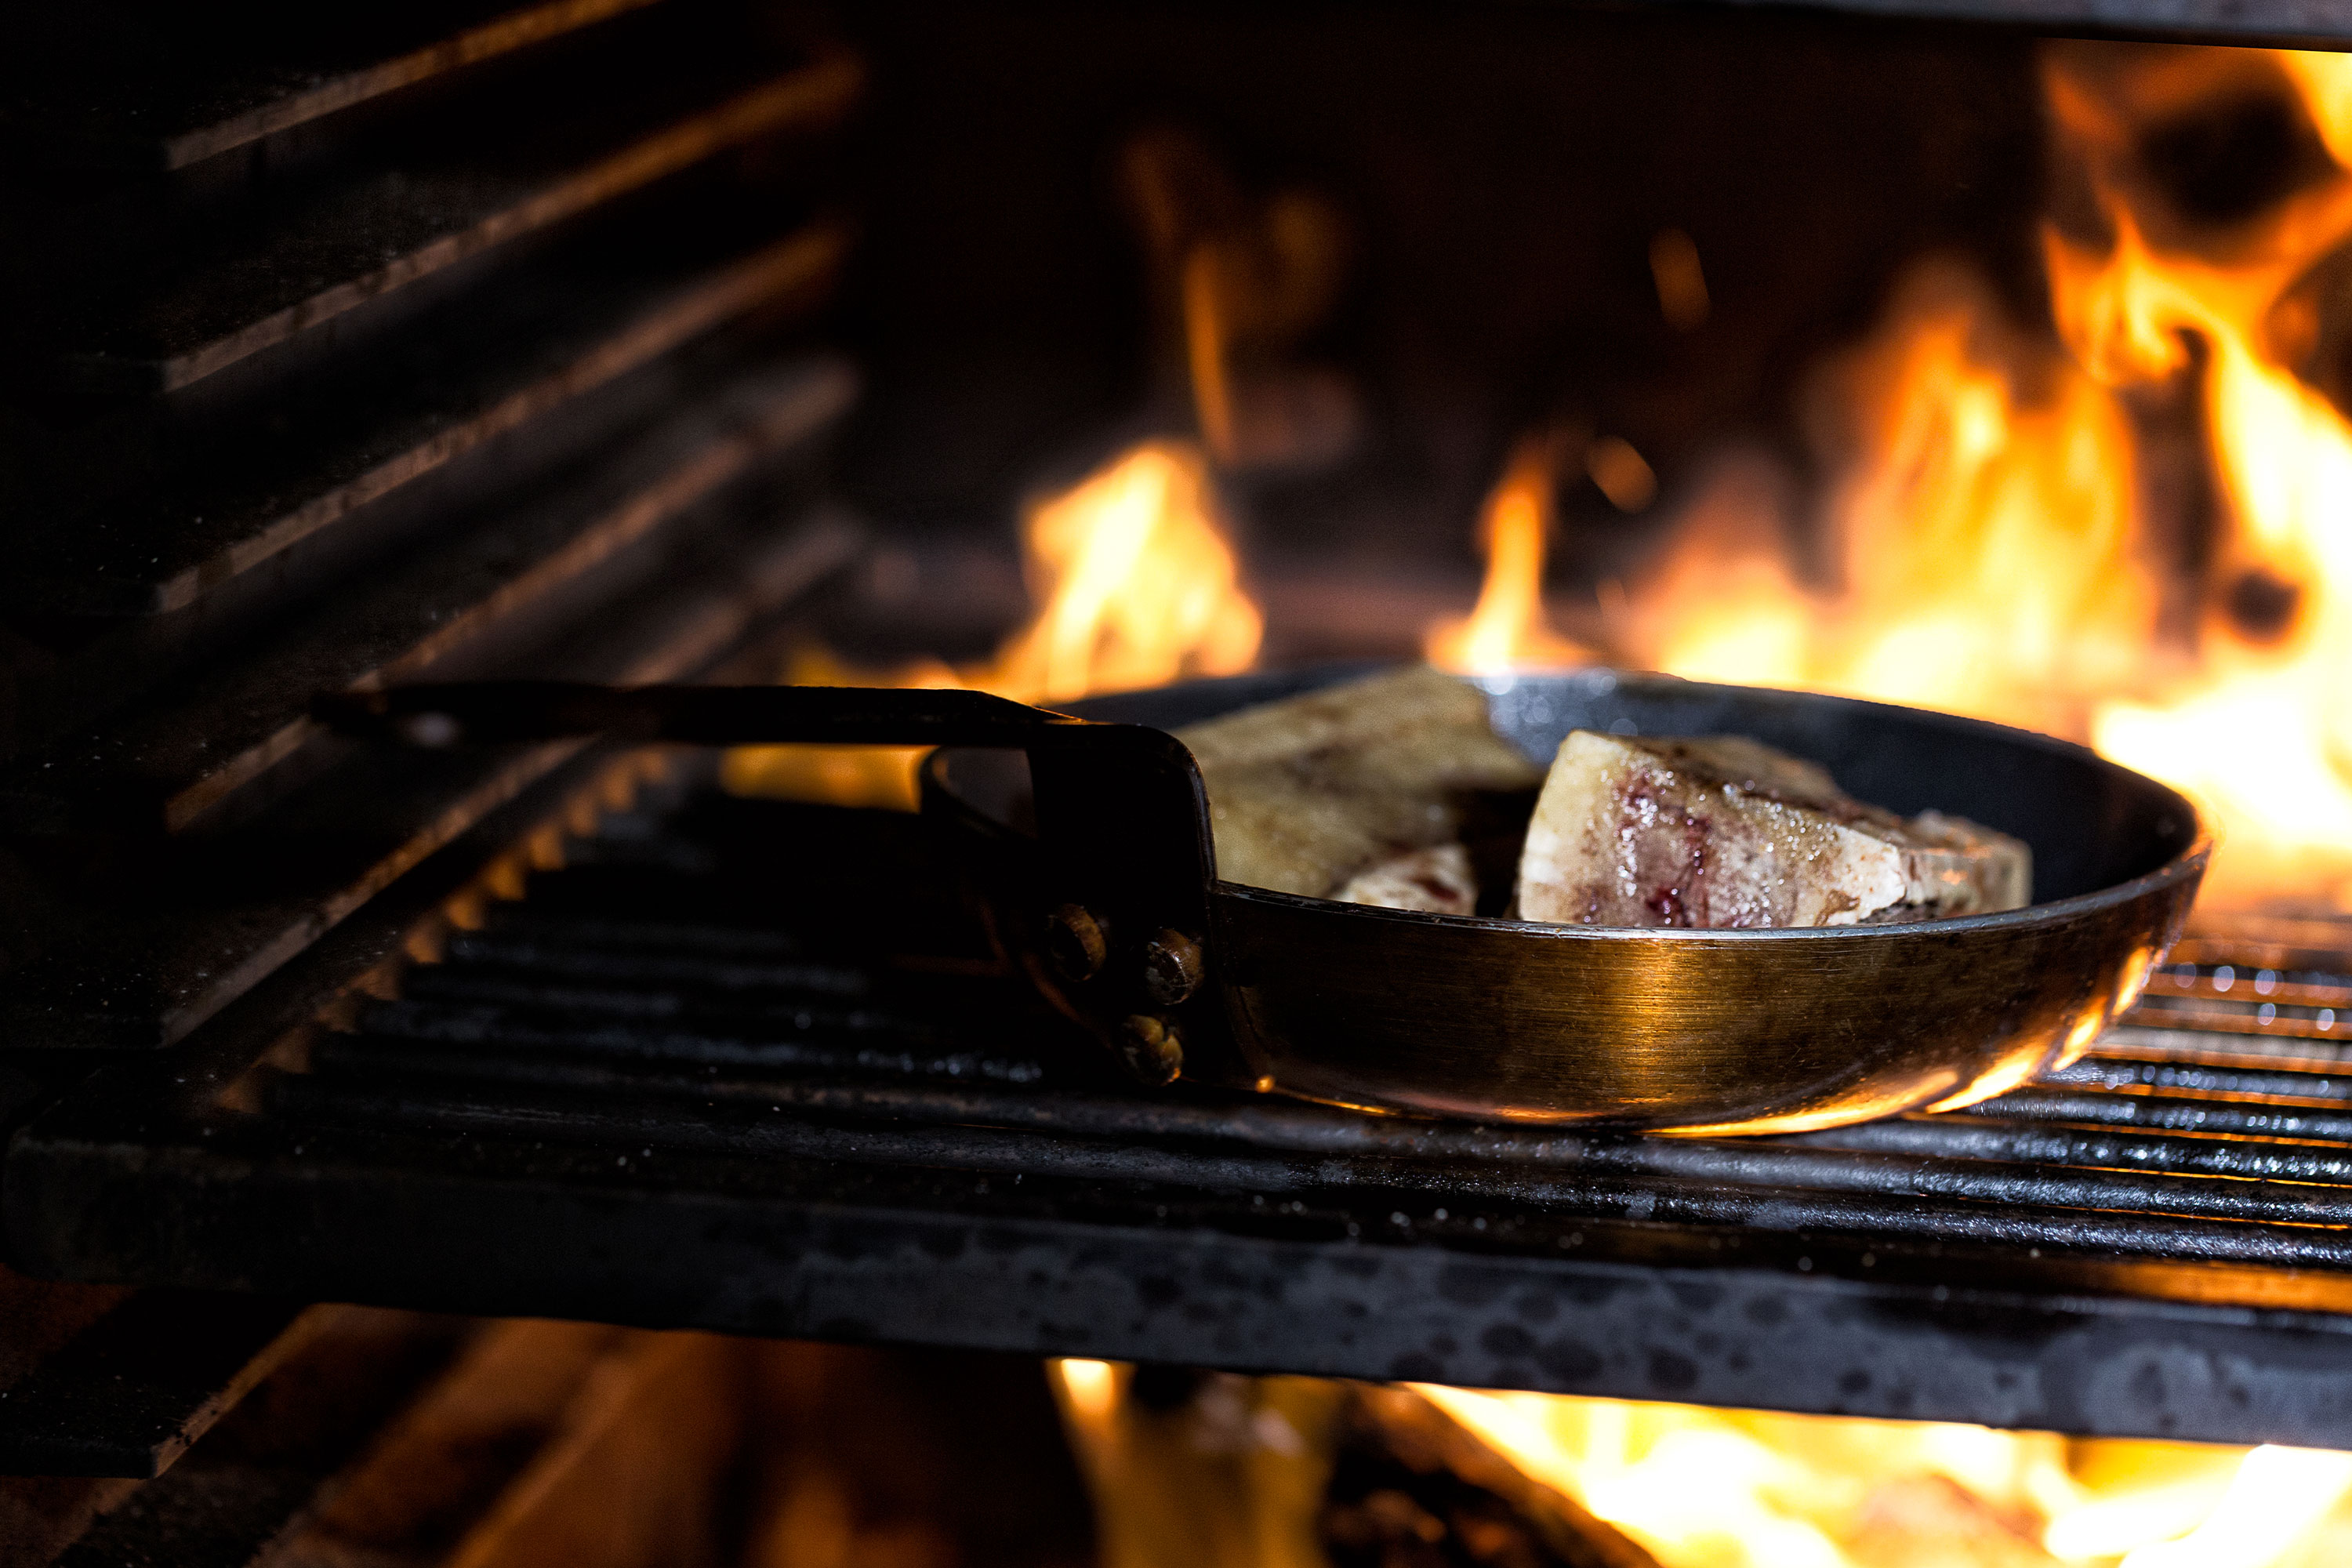 80% of cooking is done in our charcoal oven using natural apple wood